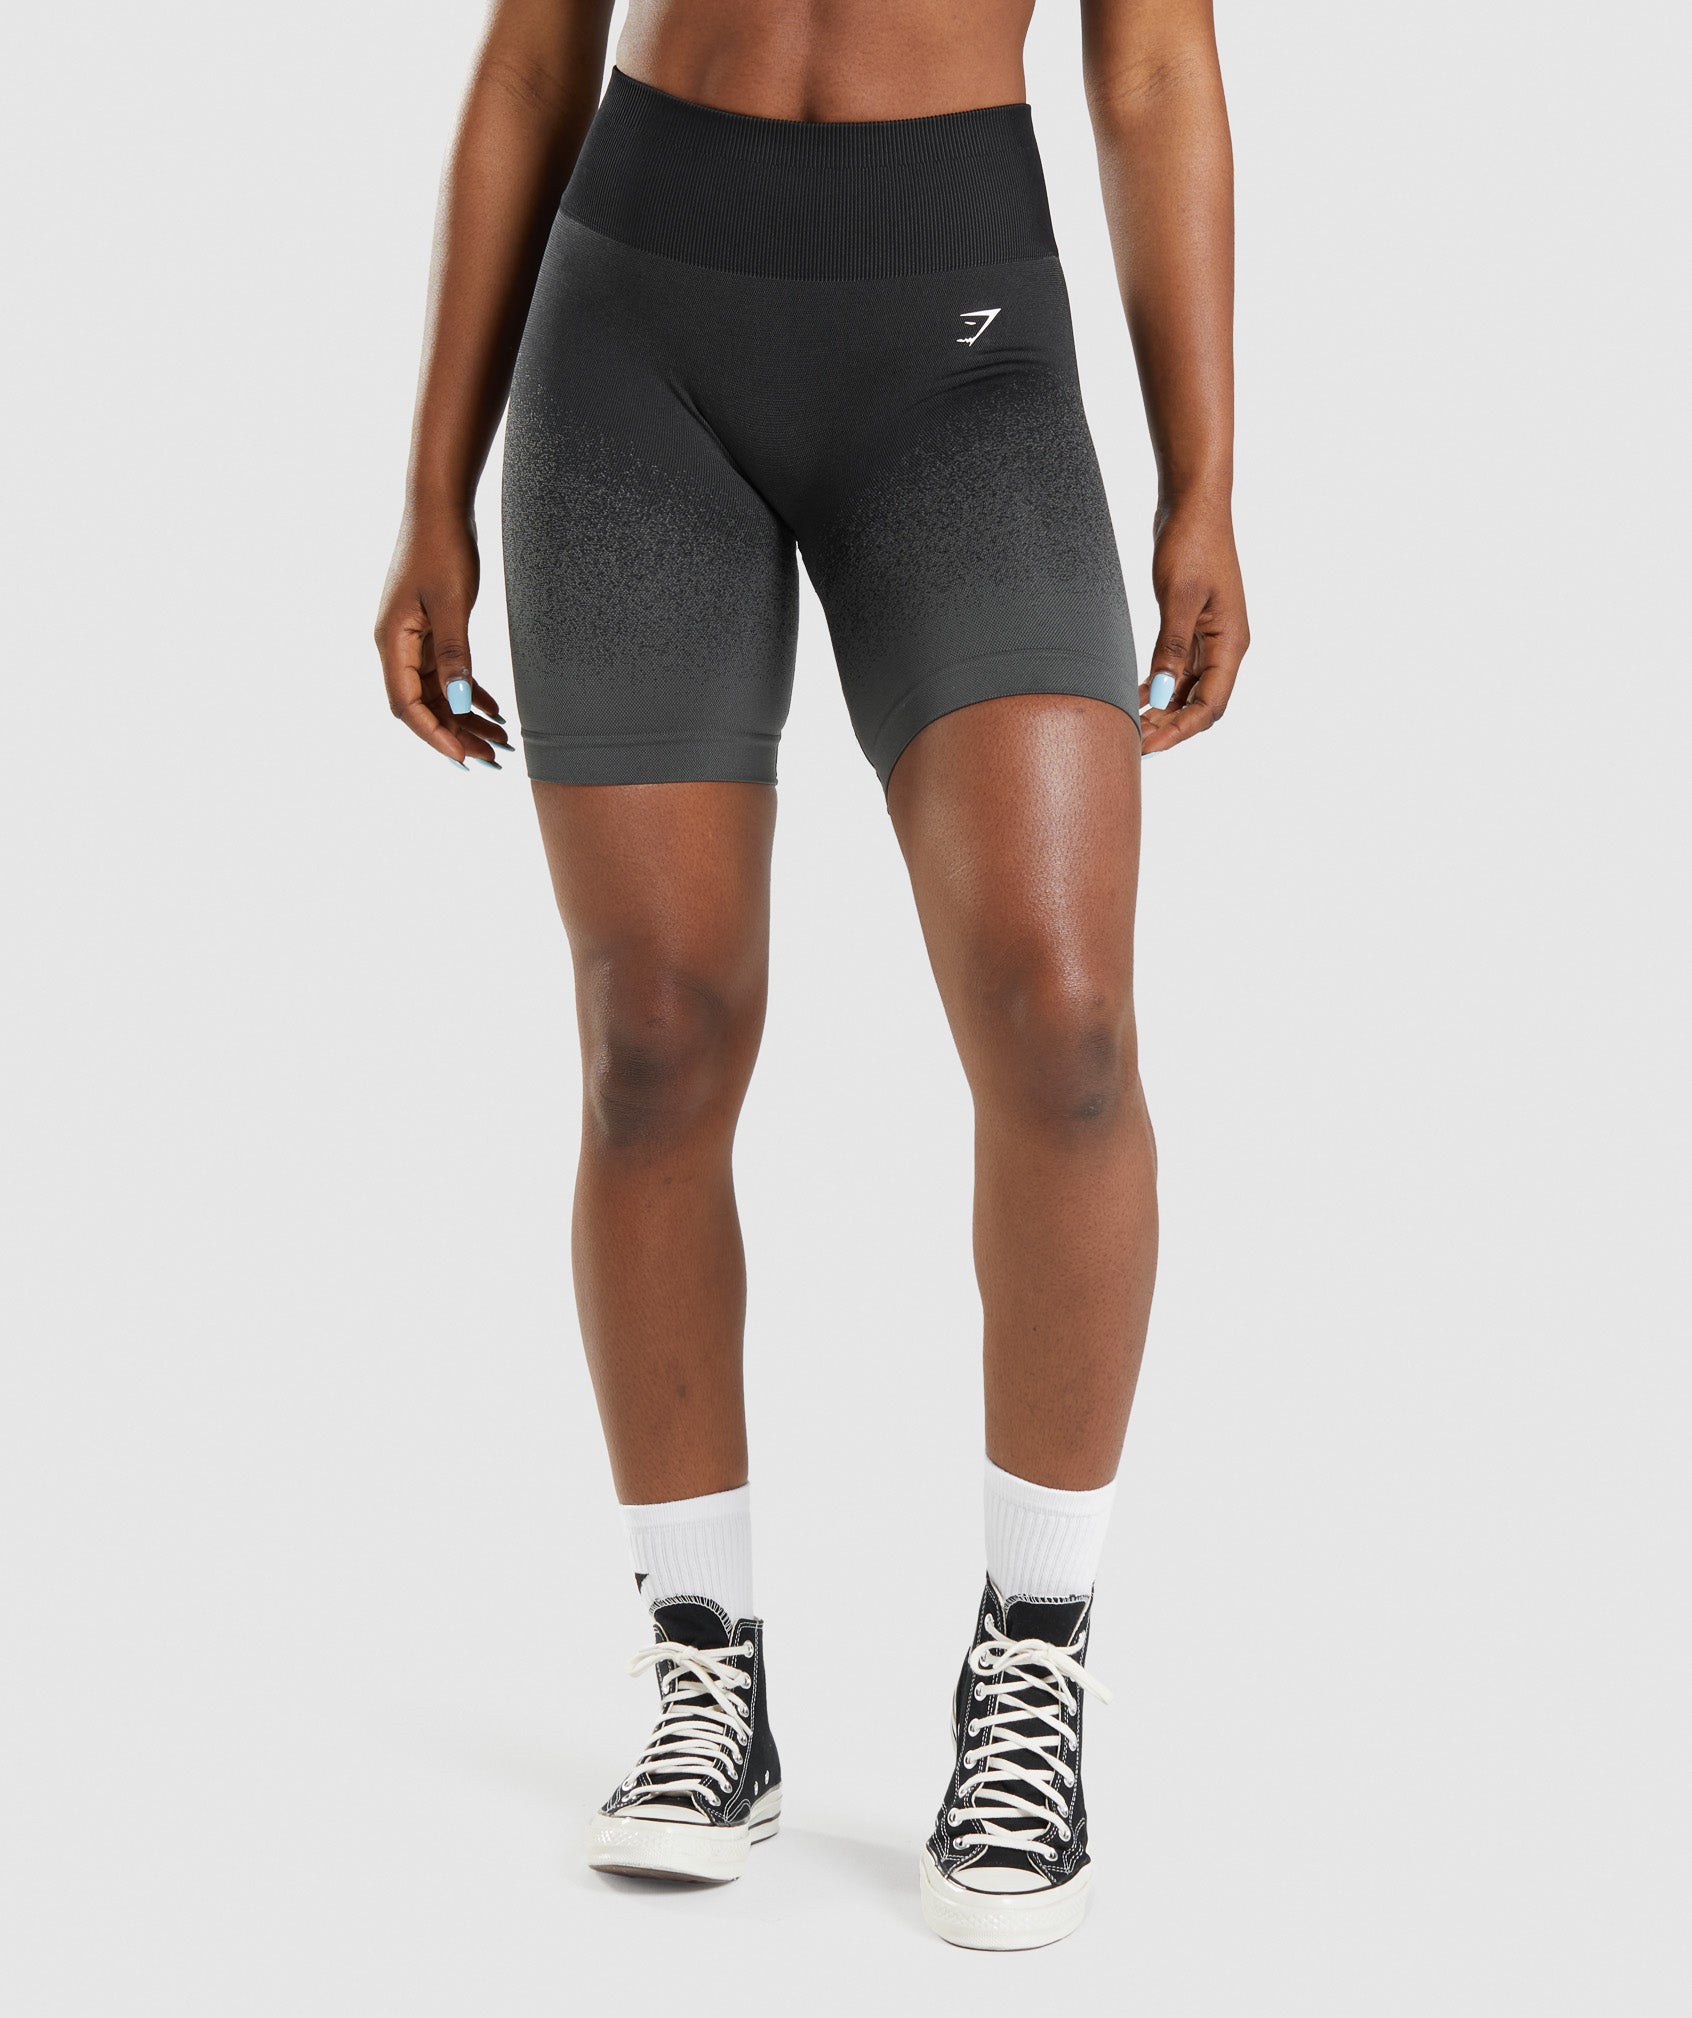 Adapt Ombre Seamless Cycling Shorts in Black/Grey